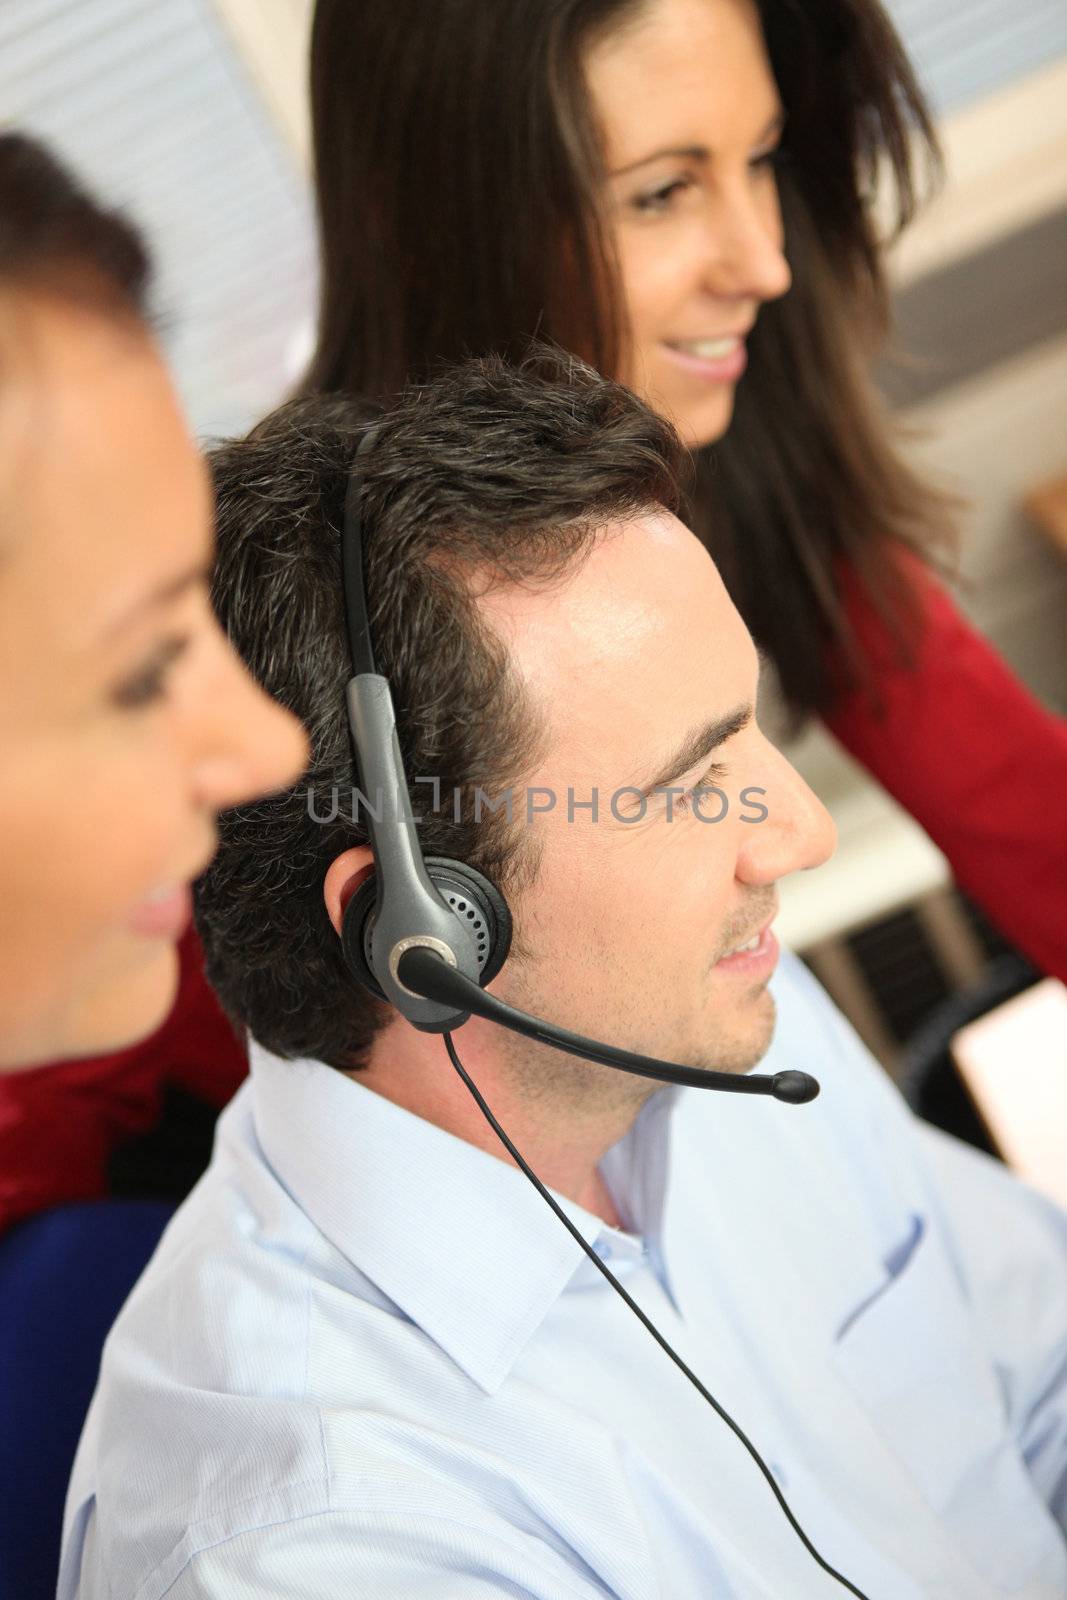 Phone operator in office